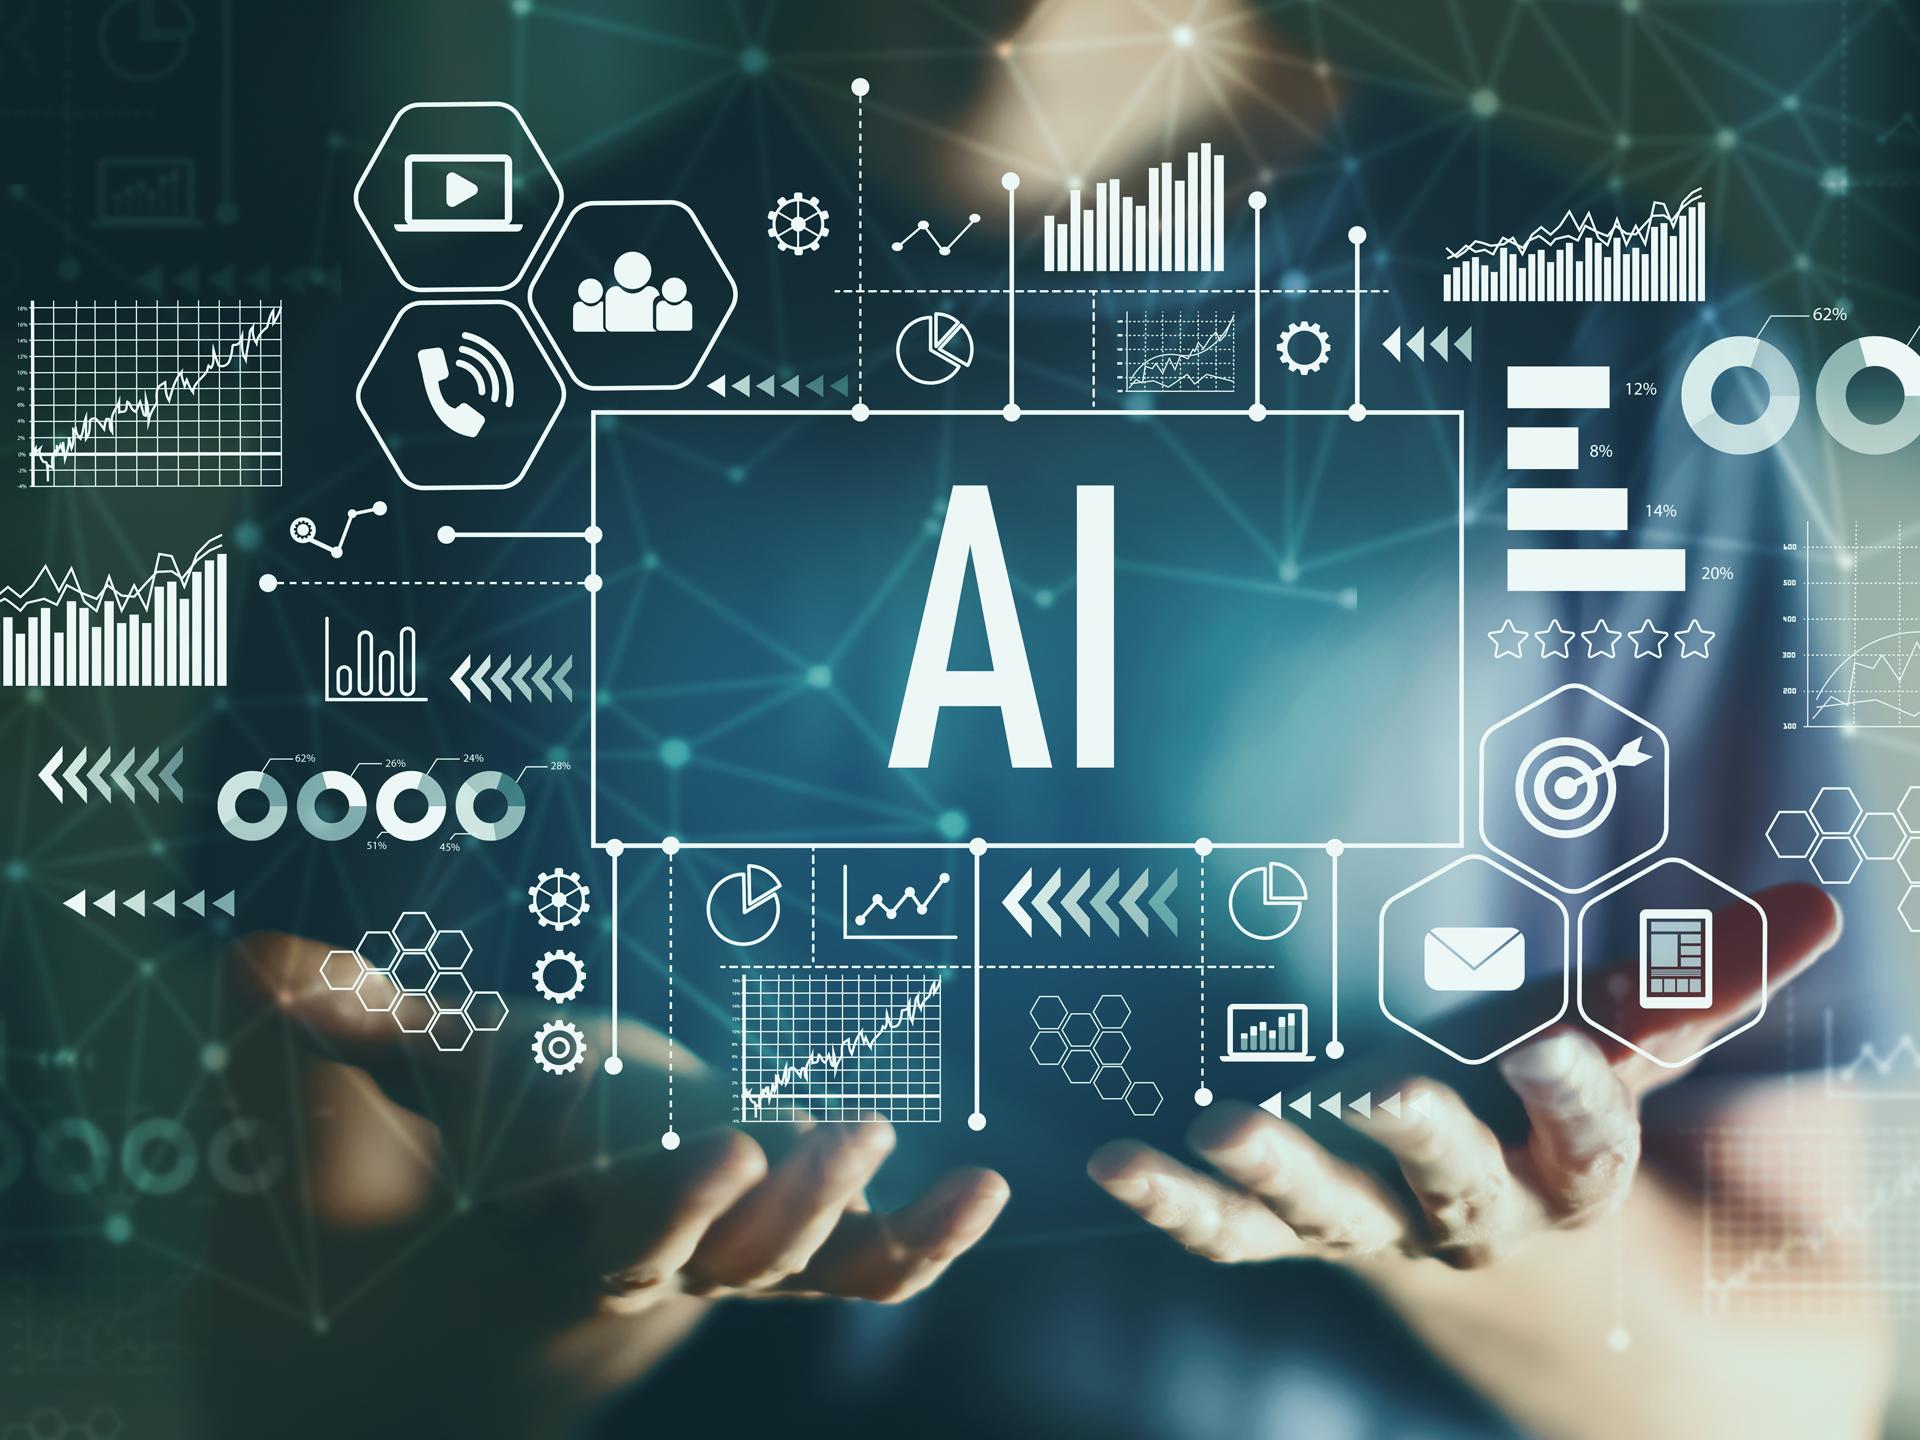 Center for Socially Responsible AI invites seed funding proposals 